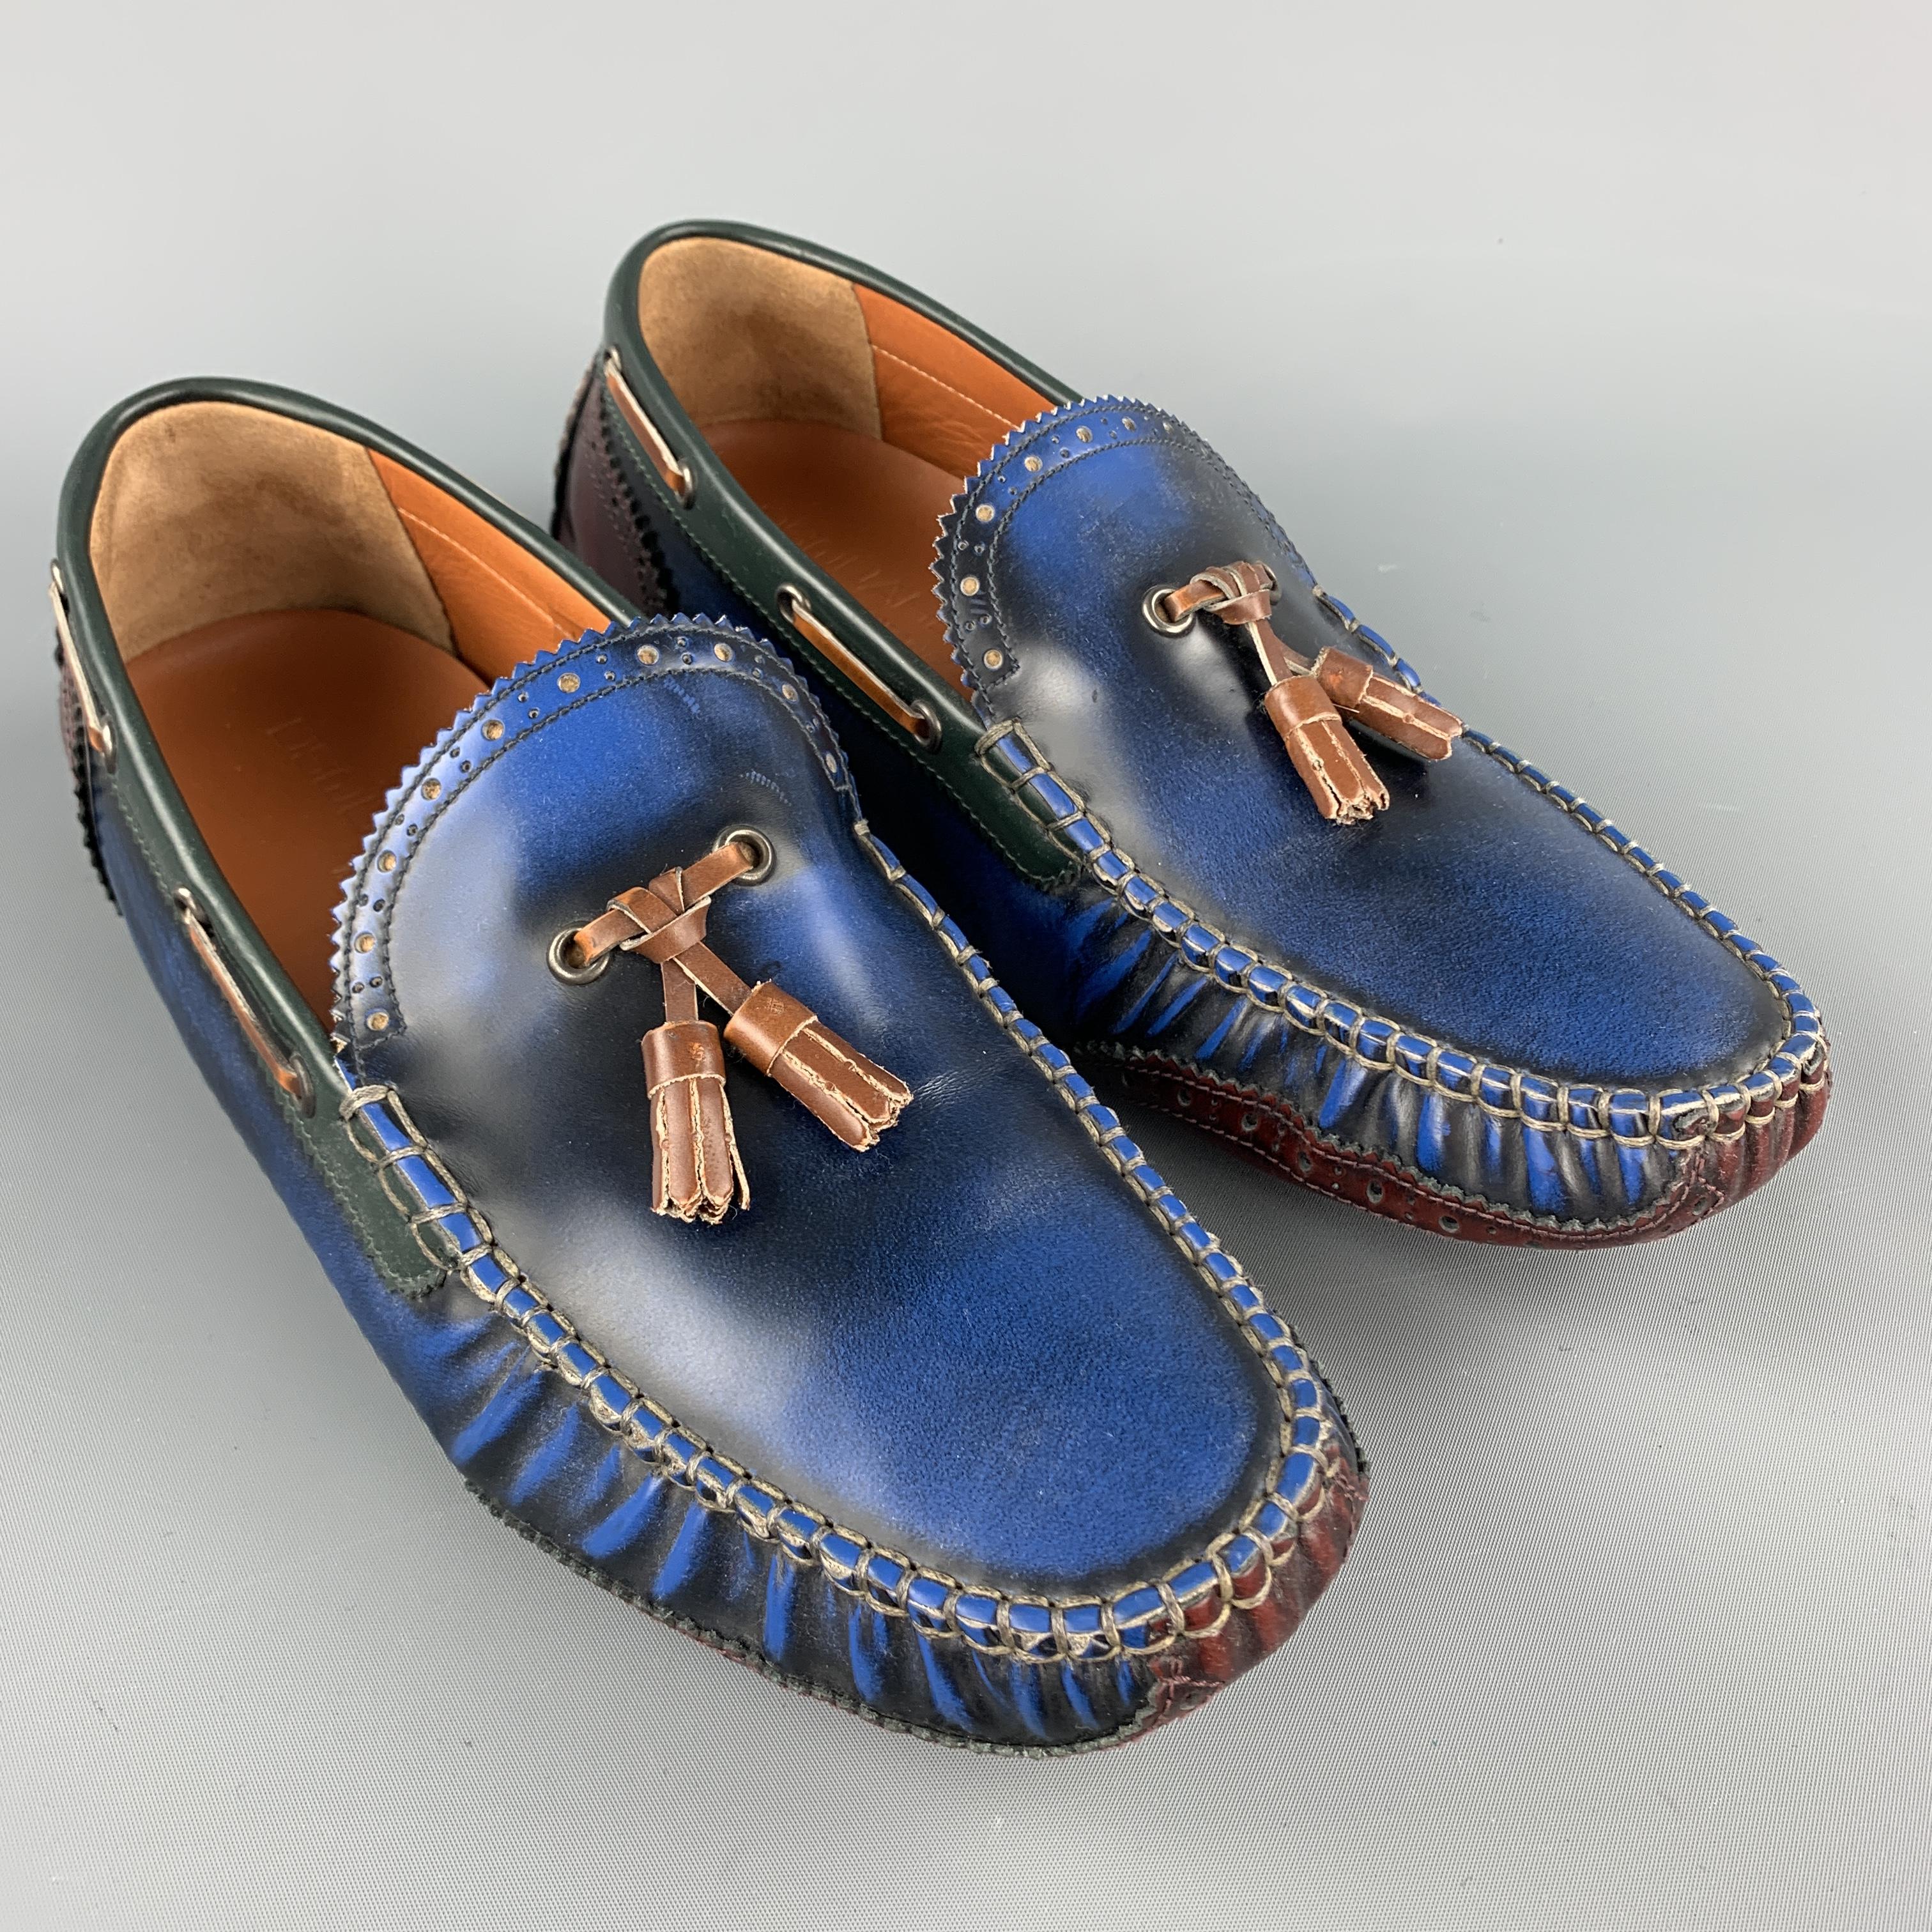 DSQUARED2 loafers come in antique effect blue leather with brown woven tassels, brown panels, and driver sole. Made in Italy.

Excellent Pre-Owned Condition.
Marked: IT 43

Outsole: 11.5 x 4 in.